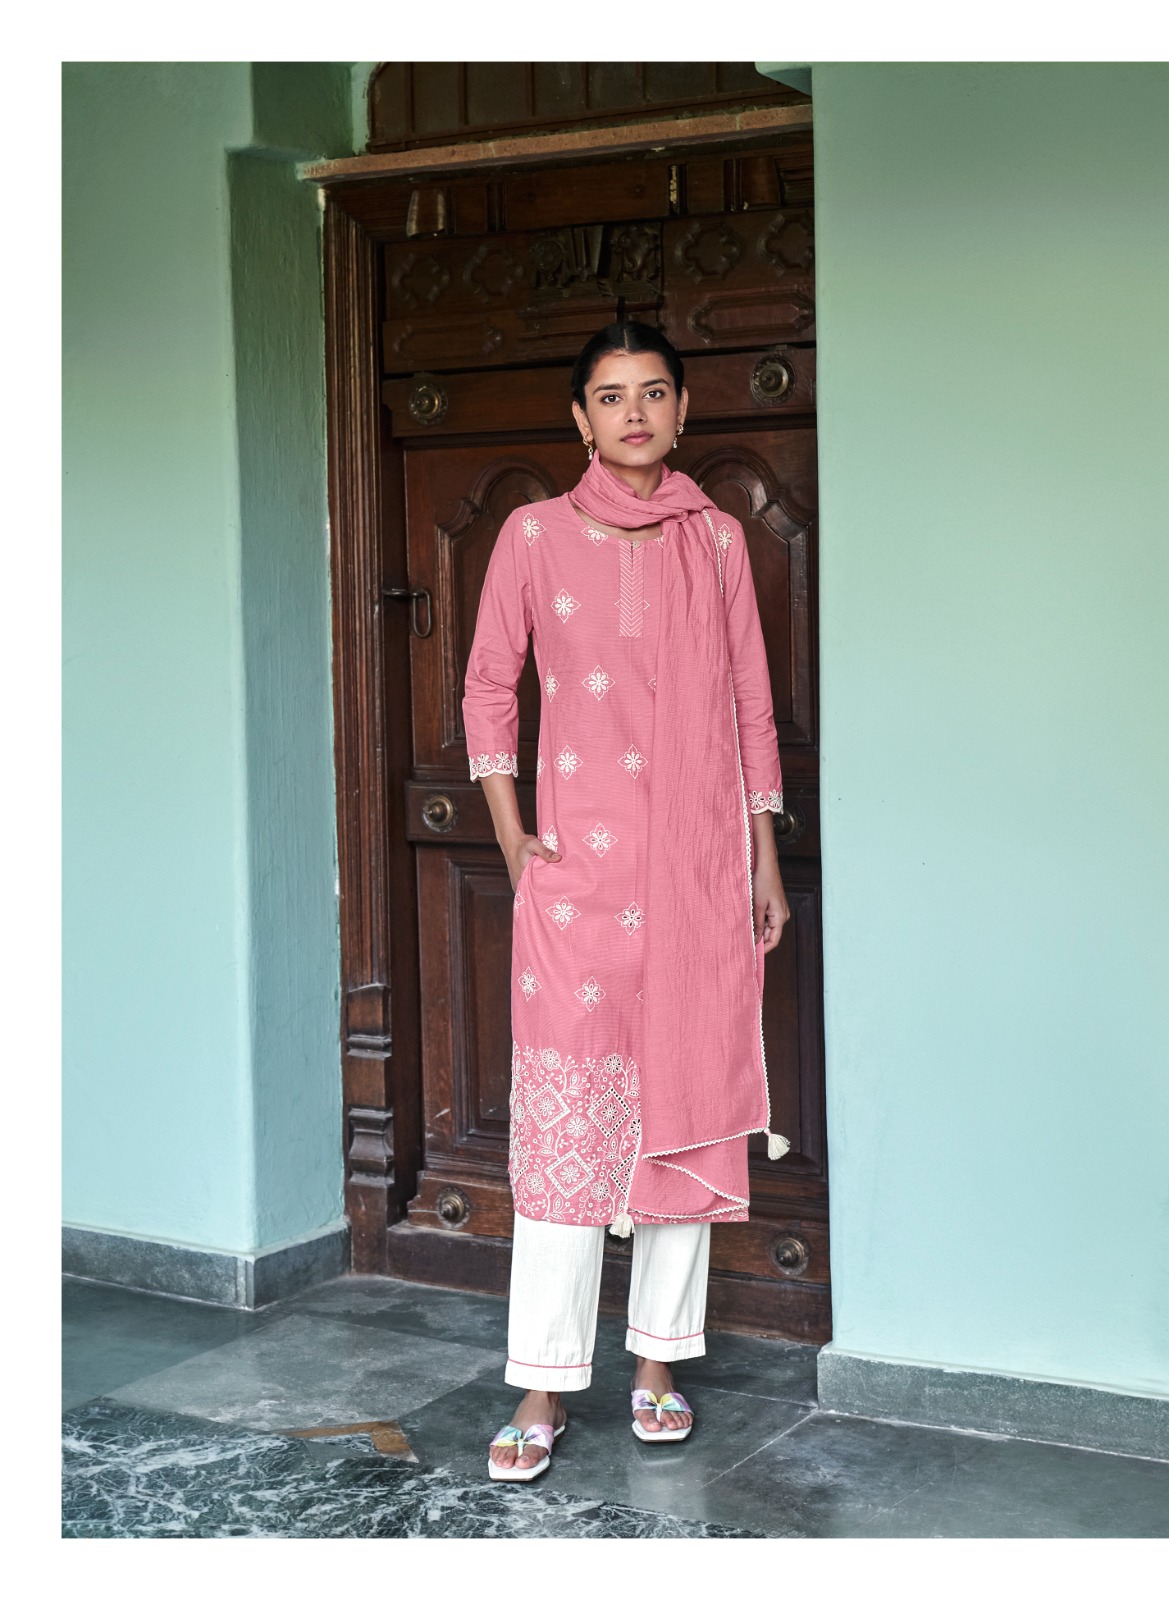 four buttons innar cotton attrective look top bottom with dupatta catalog